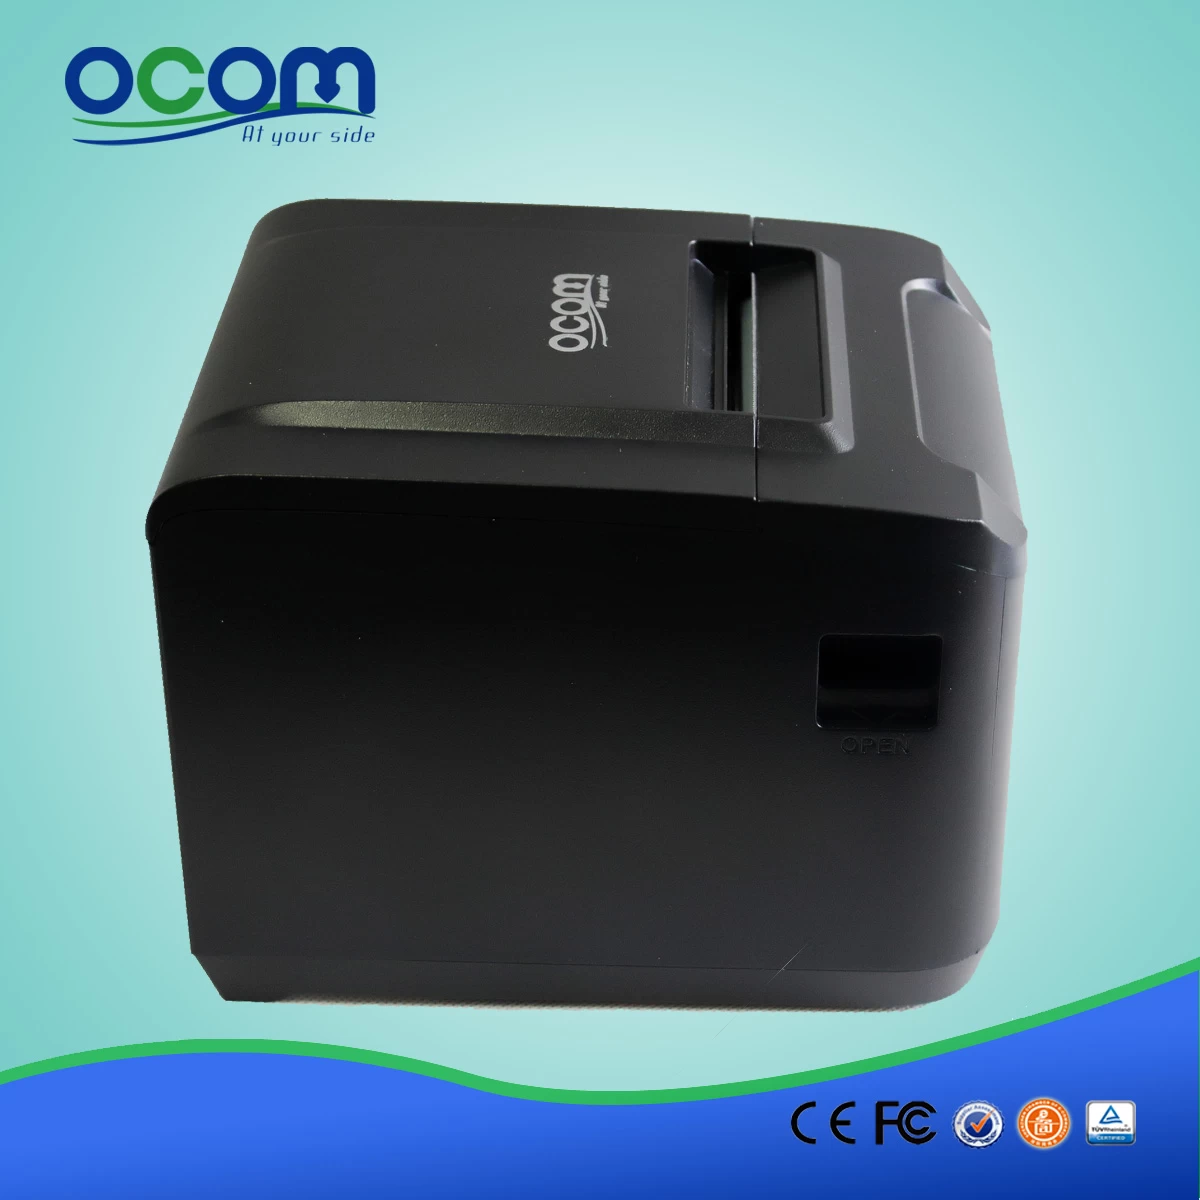 China made 80mm high speed auto cutter POS thermal printer-OCPP-808-URL